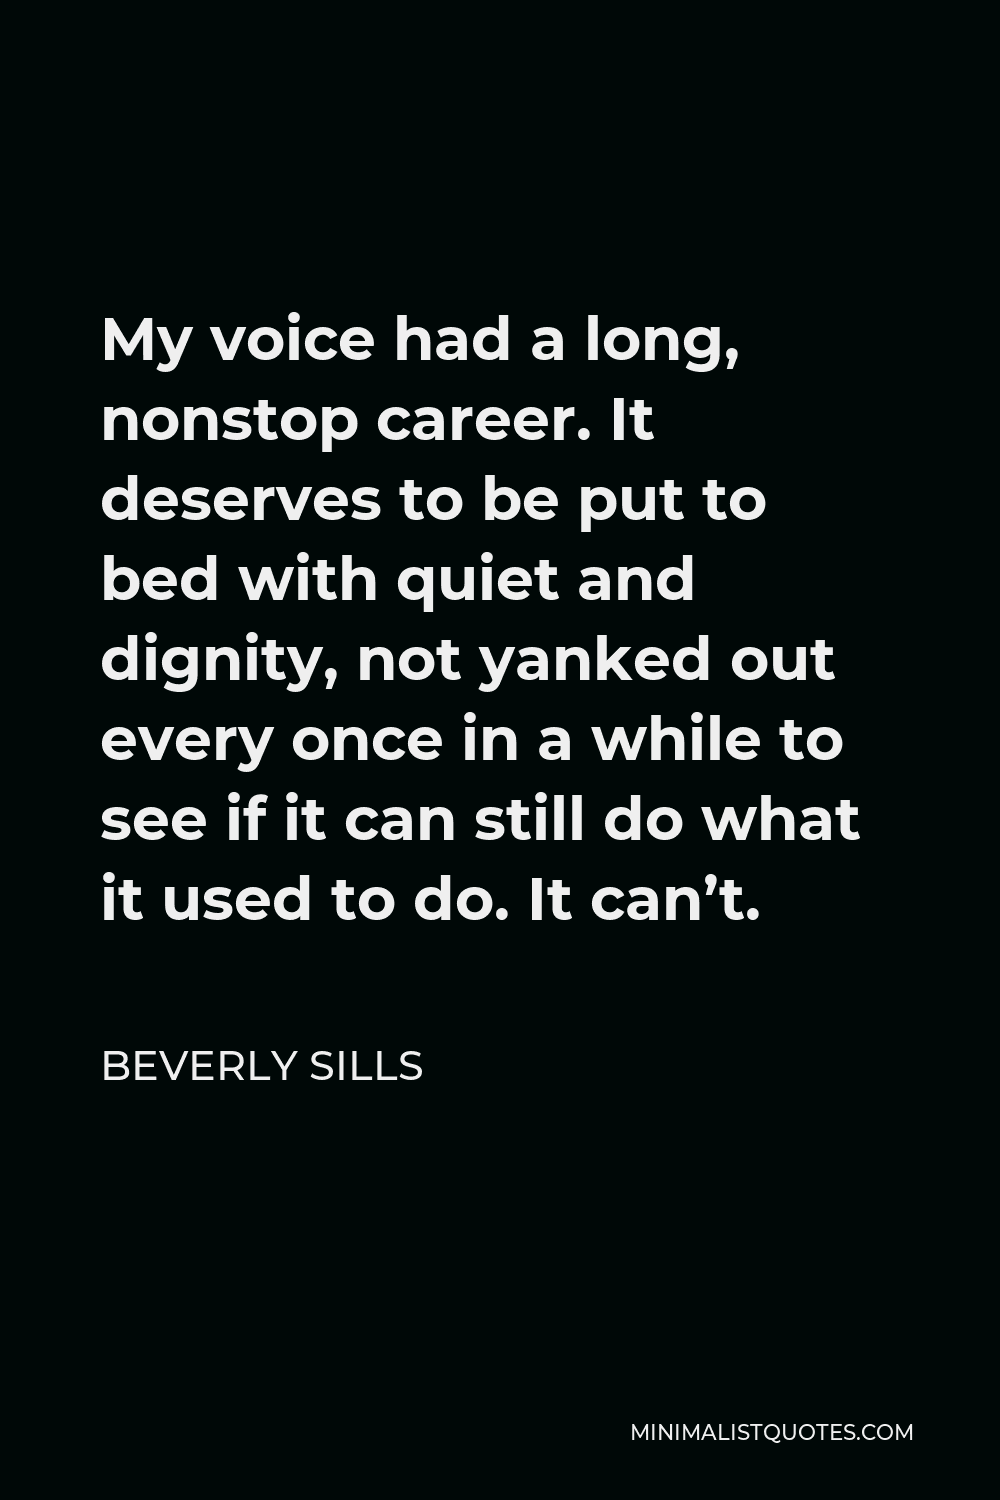 Beverly Sills Quote - My voice had a long, nonstop career. It deserves to be put to bed with quiet and dignity, not yanked out every once in a while to see if it can still do what it used to do. It can’t.